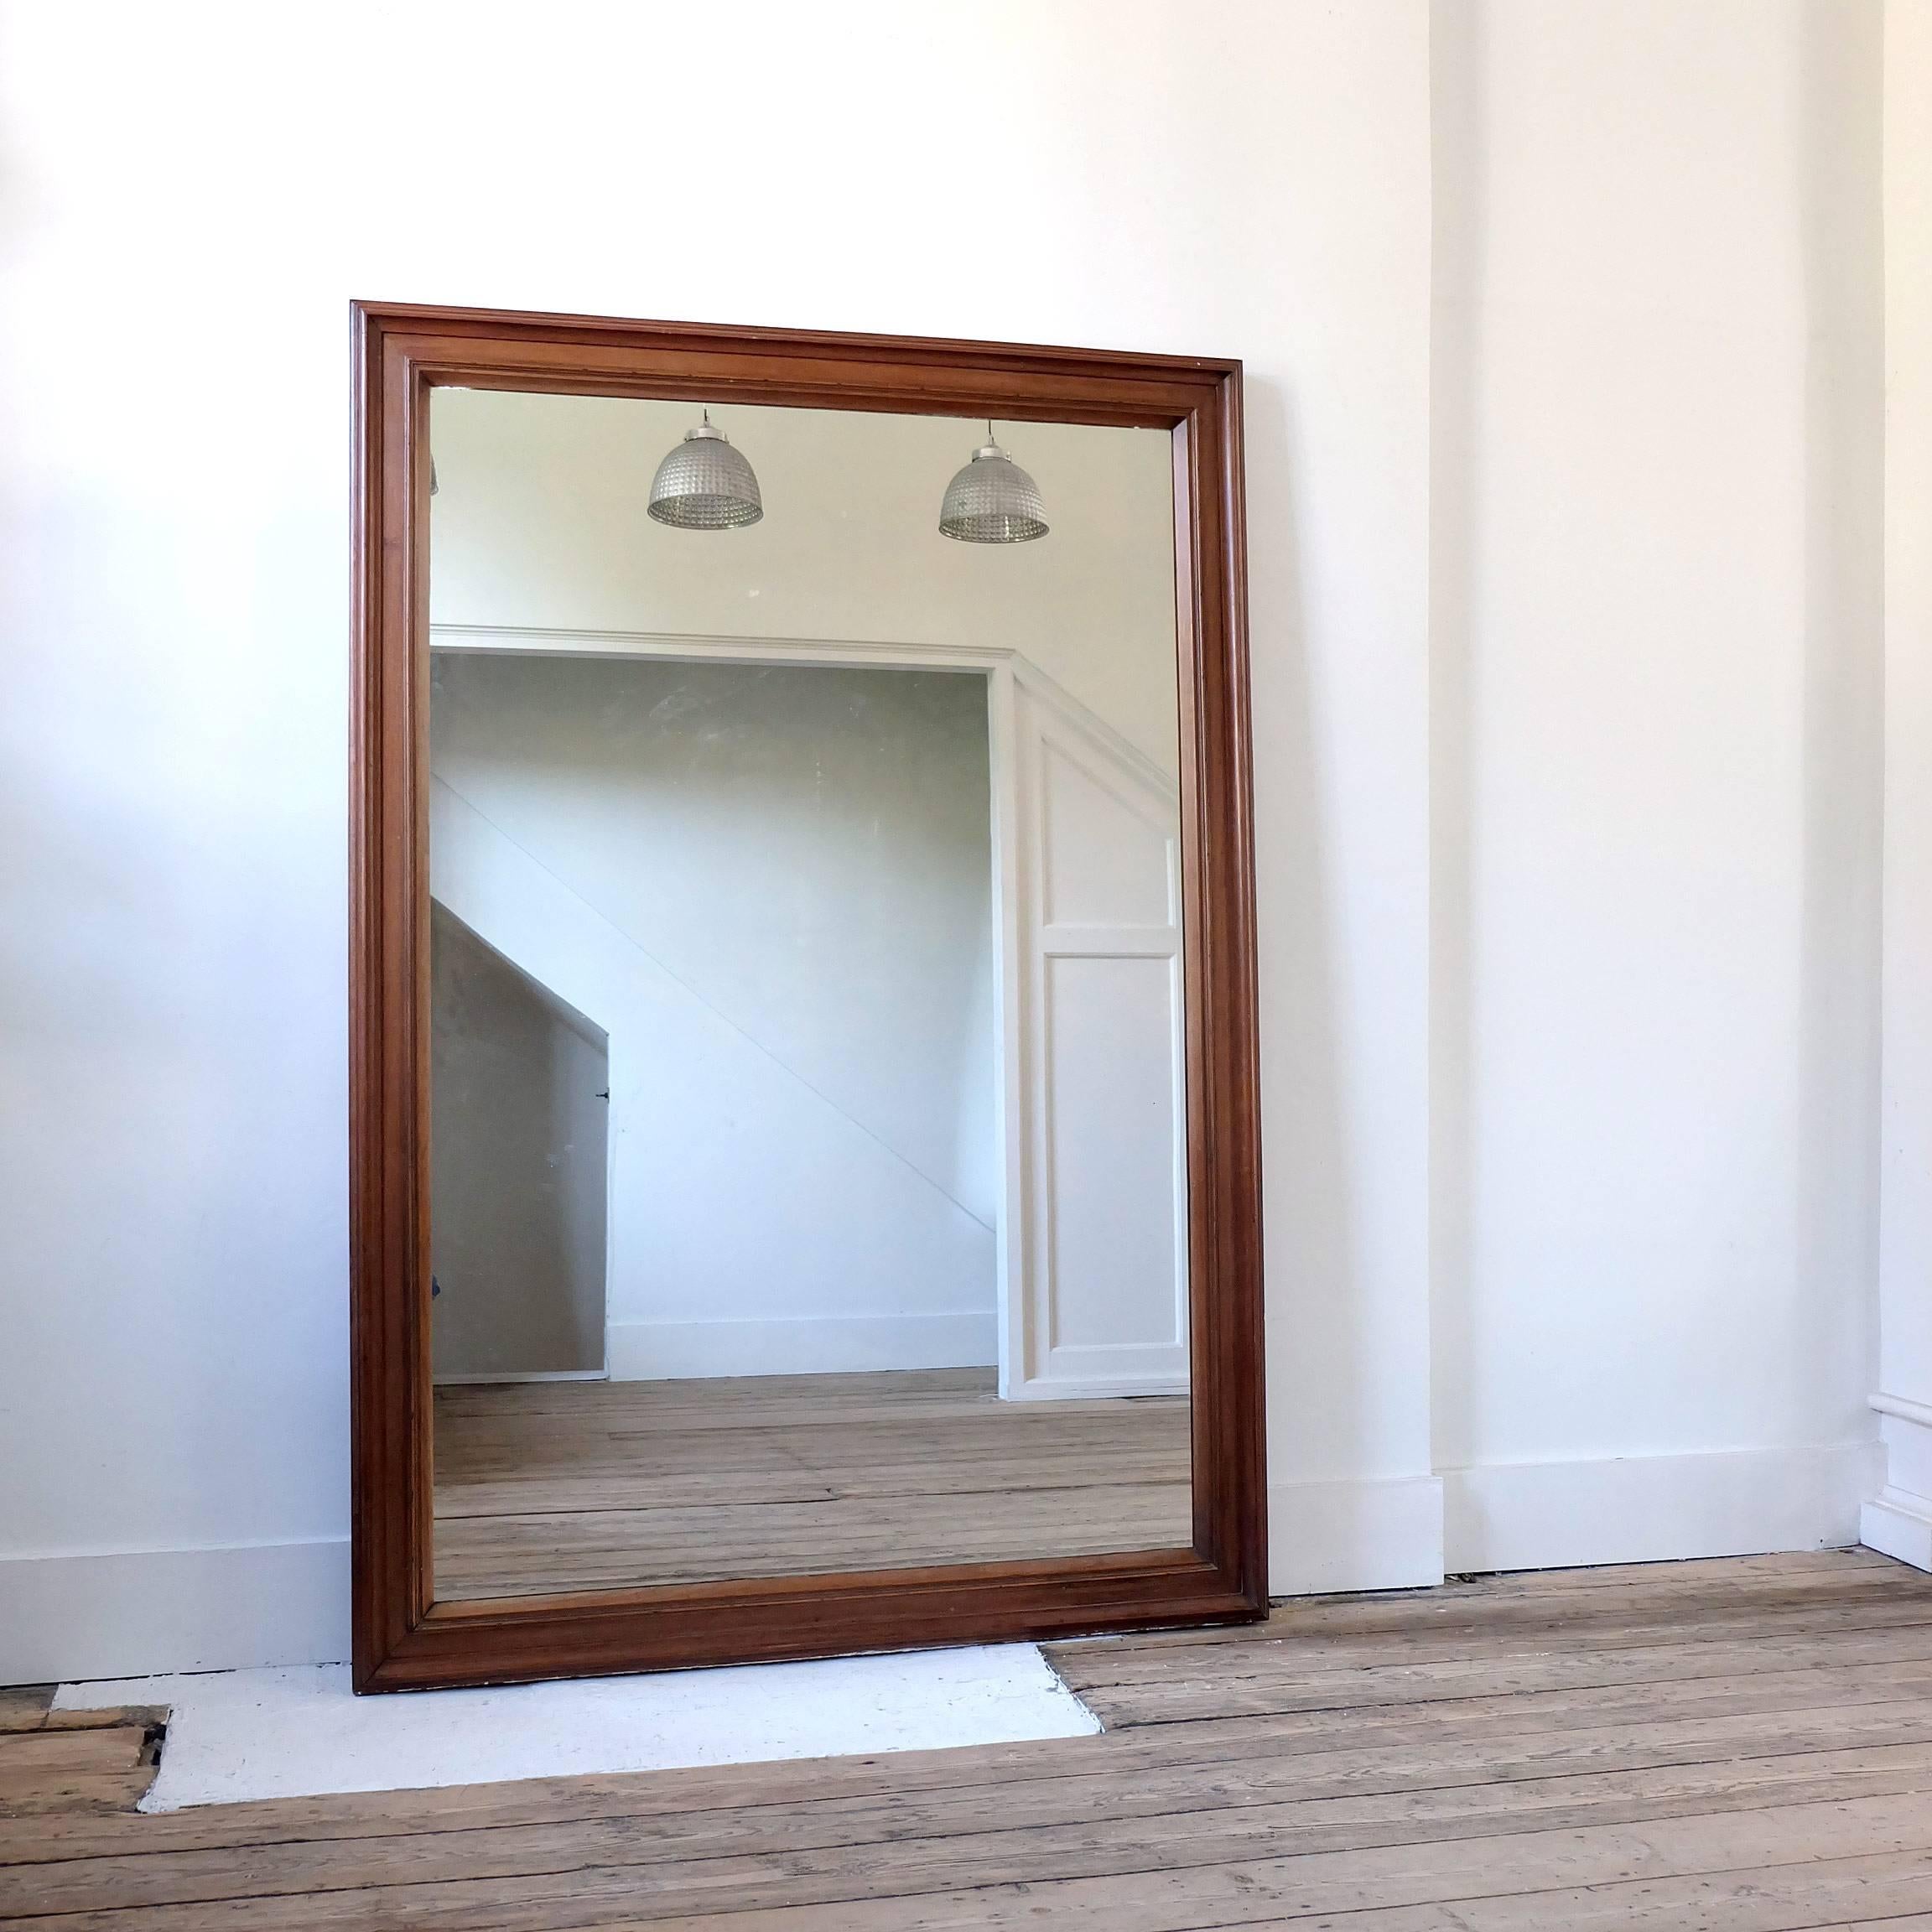 A real statement mirror, Huge Edwardian walnut frame, nice clean lines and original mirror plate.

If you`re looking for something not to fussy, then this is the mirror for you.